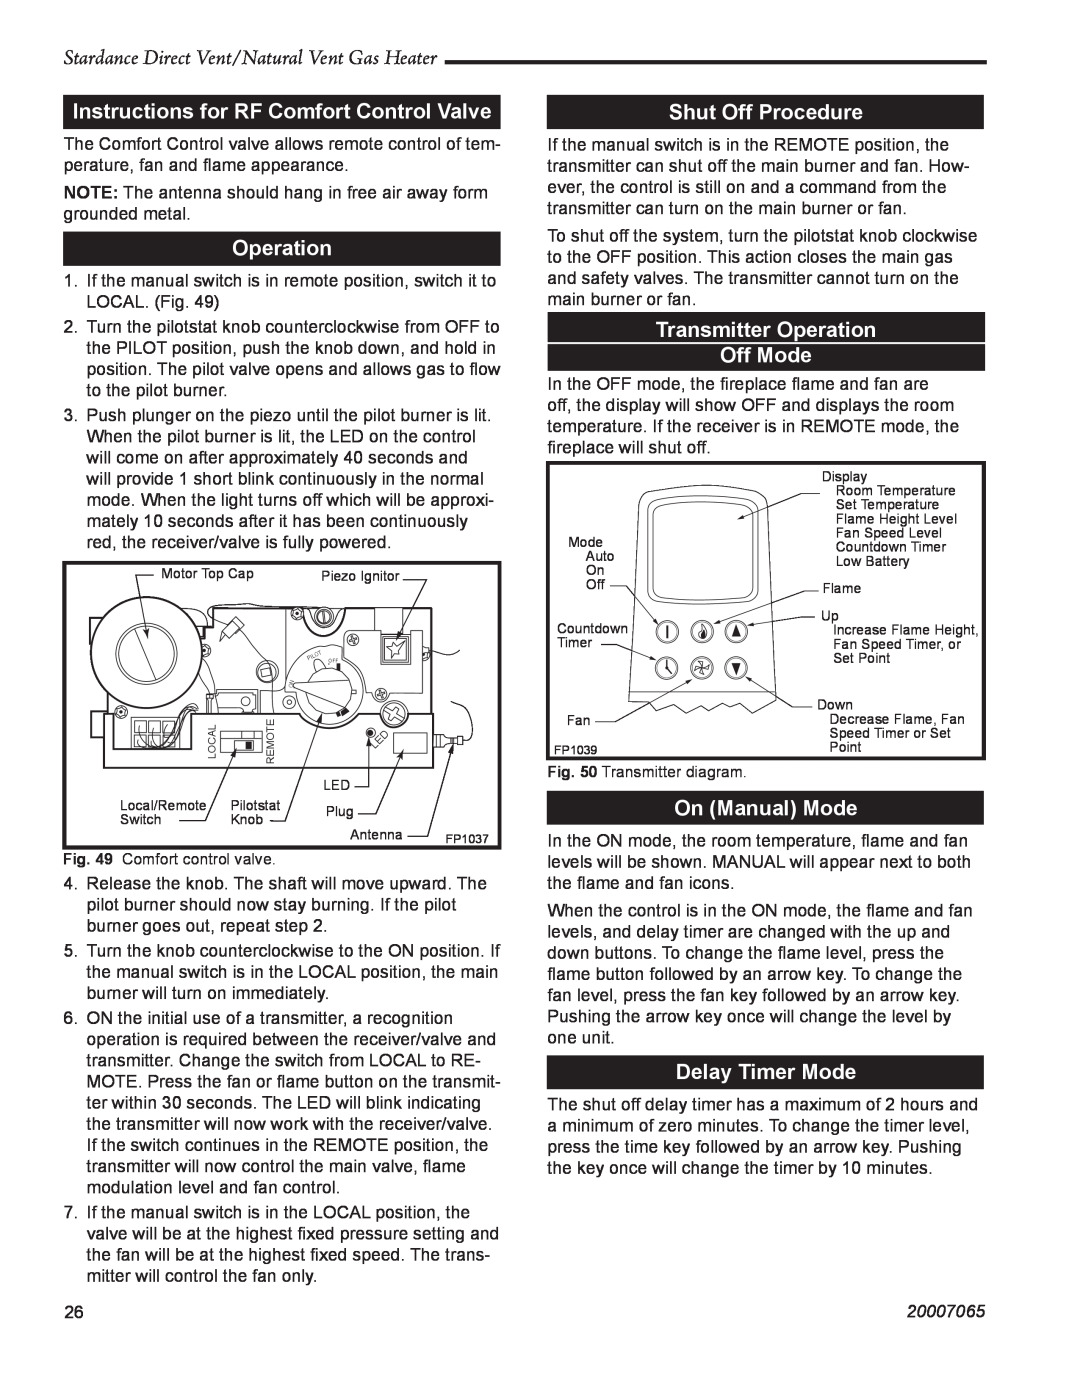 Vermont Casting SDV30 Instructions for RF Comfort Control Valve, Operation, Shut Off Procedure, On Manual Mode, 20007065 